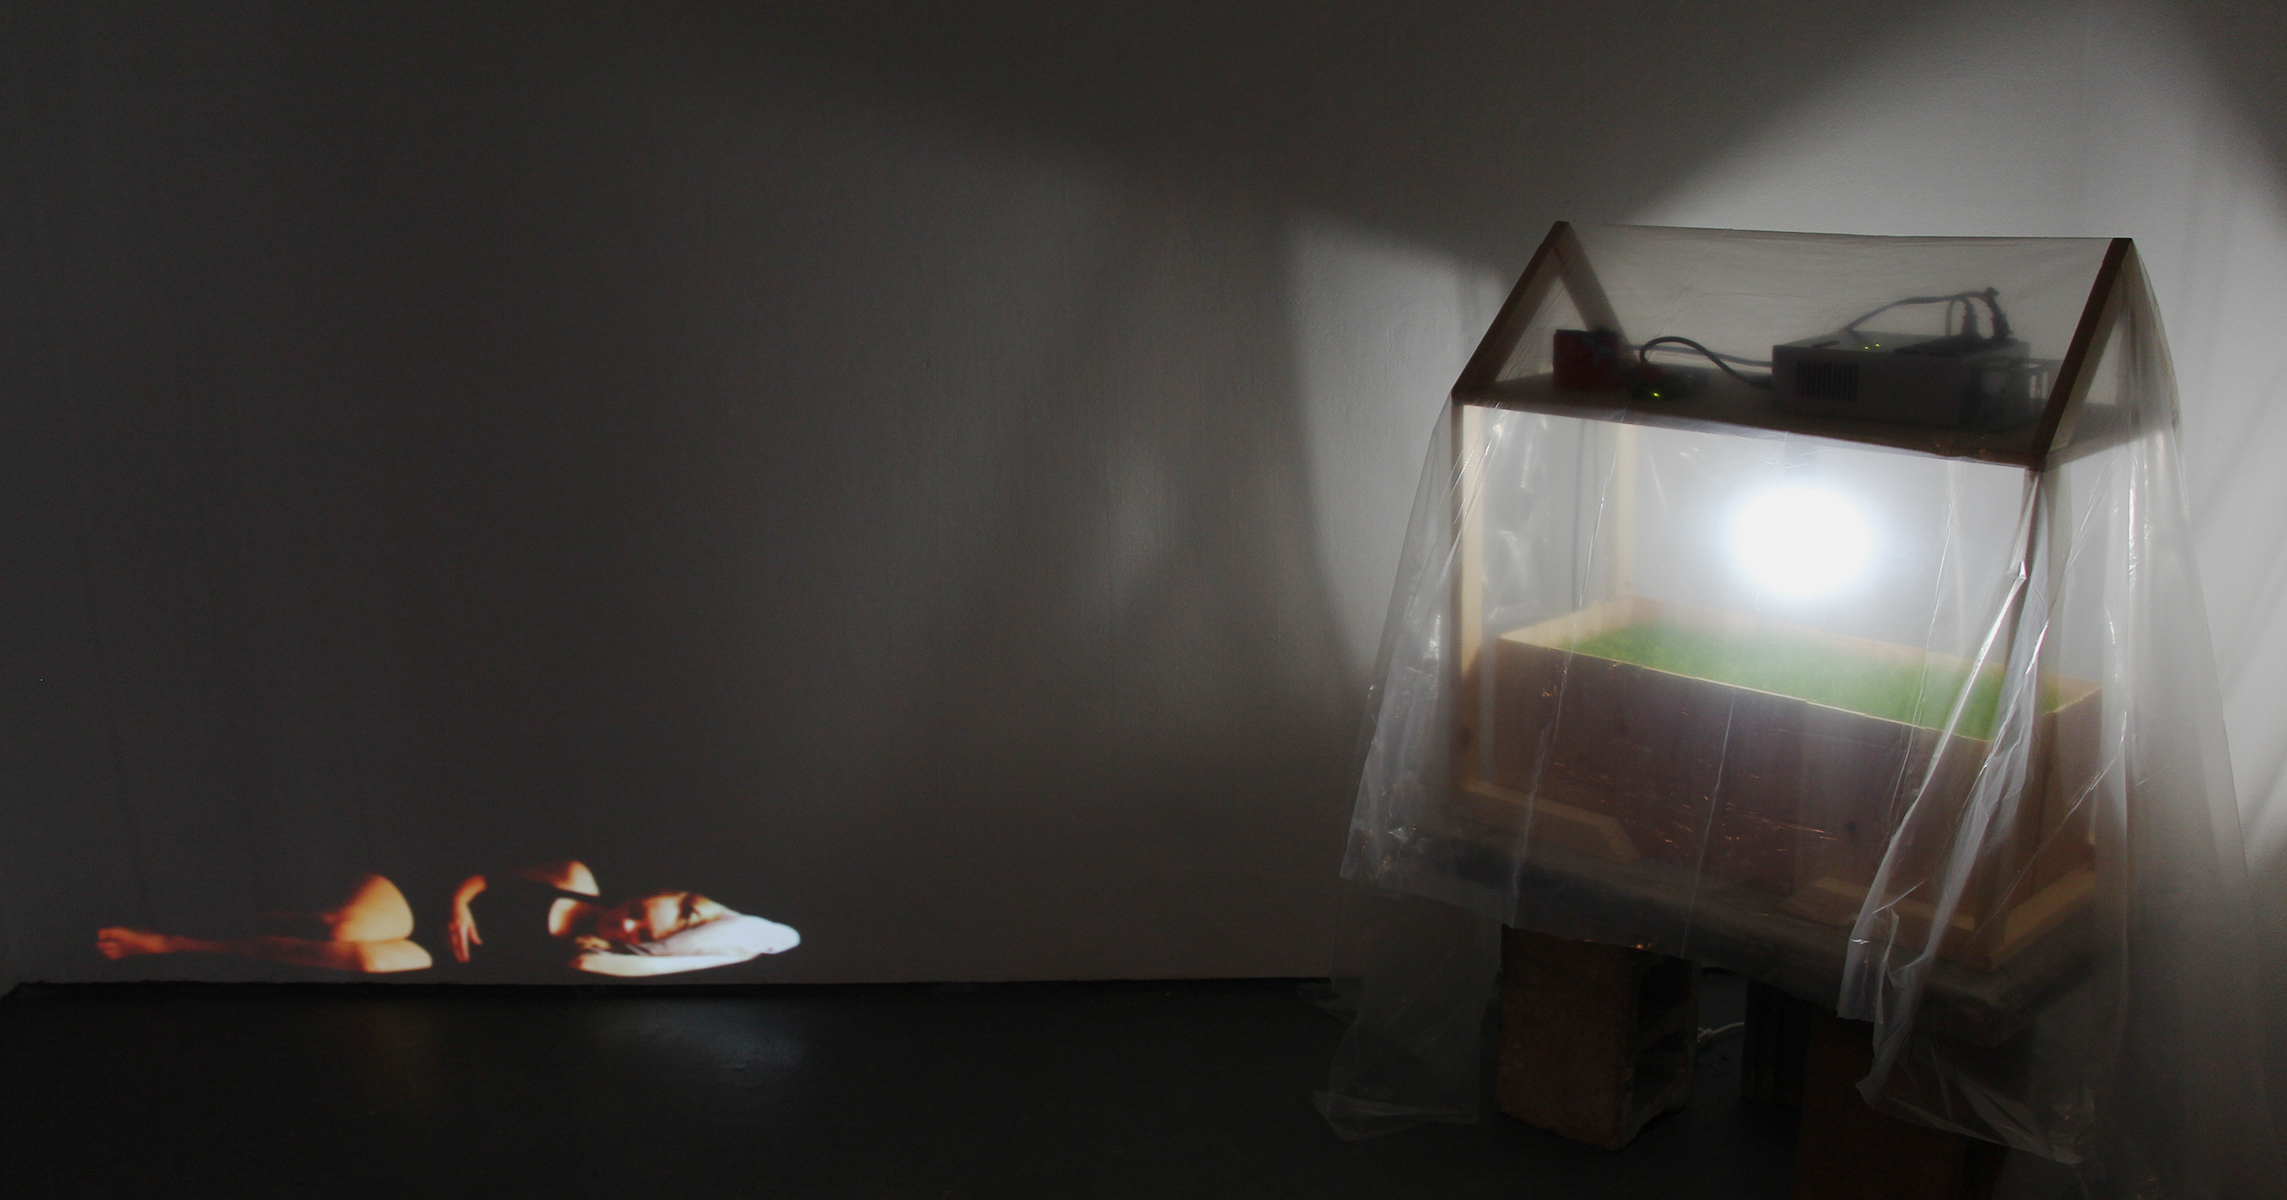    Empathy   ; wood, arduino, DMX board, dimmable LED, Johnson grass, clover, and projection; 2015   